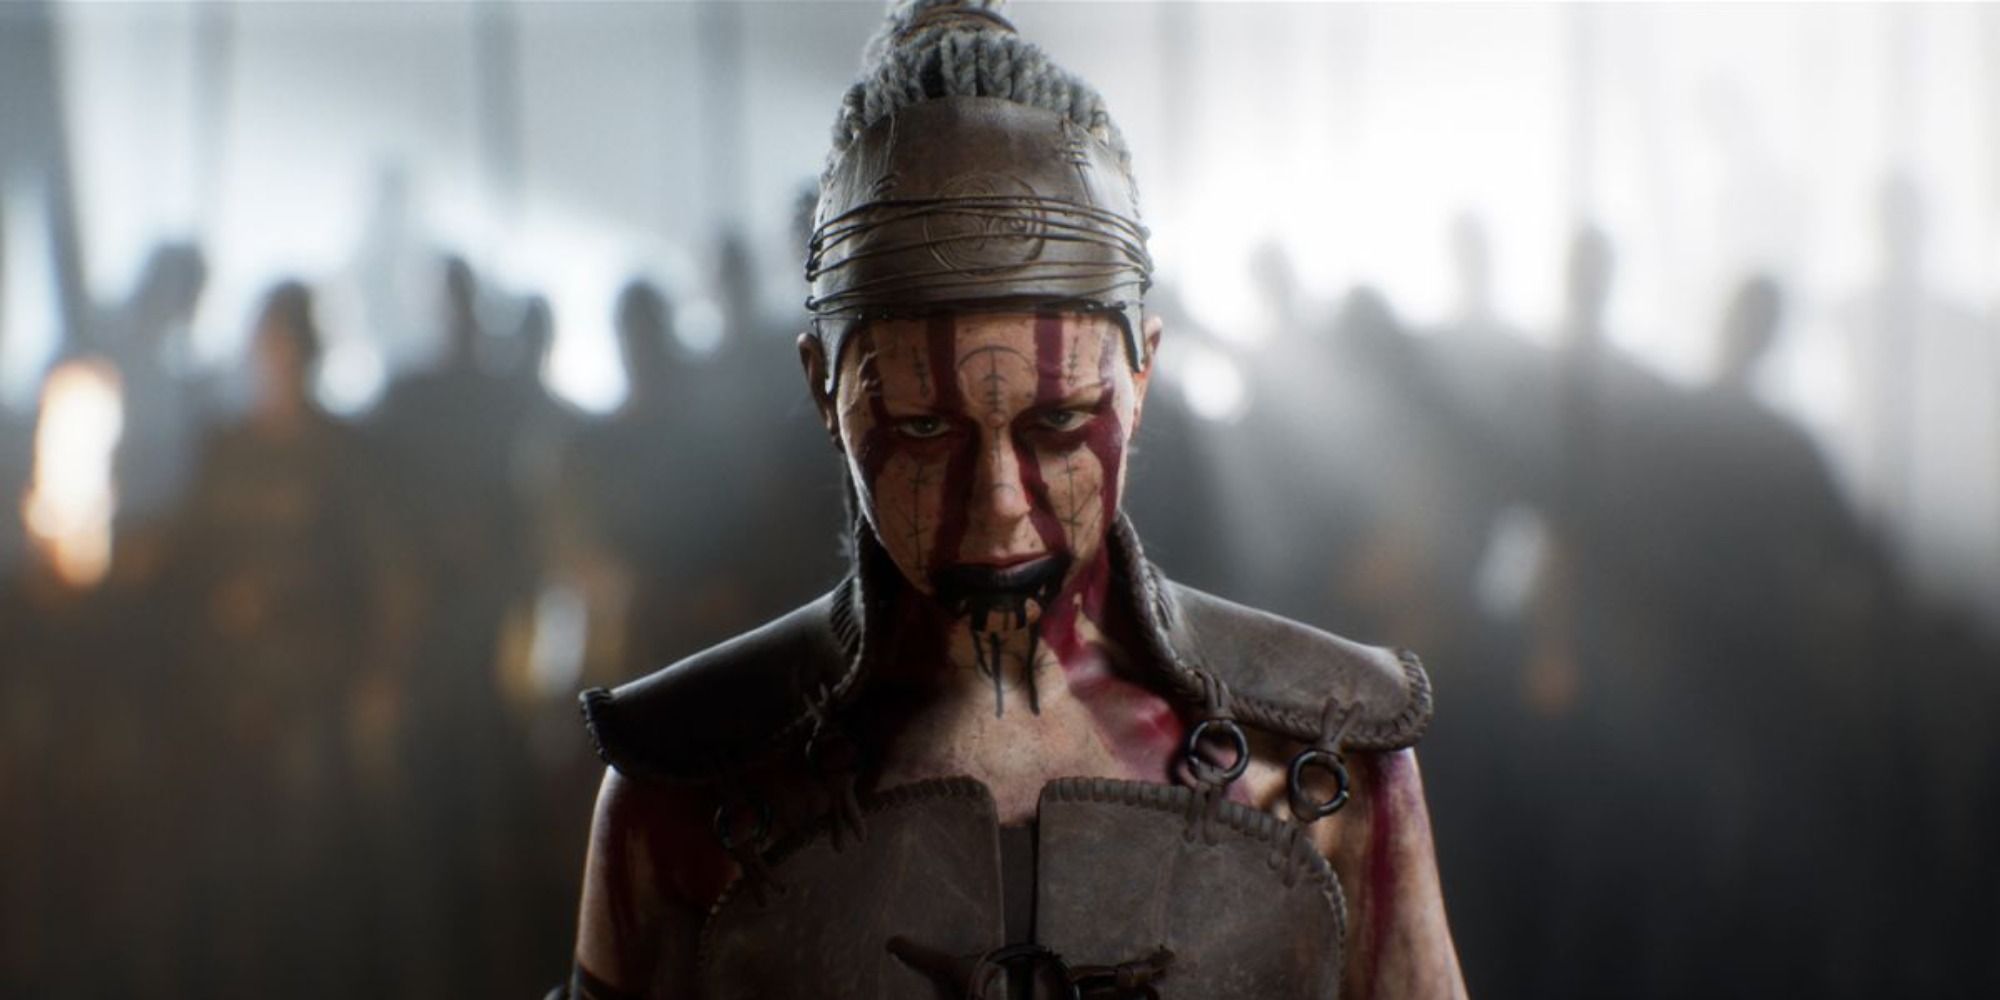 Hellblade' Creators Reveal Psychological Horror Game 'Project